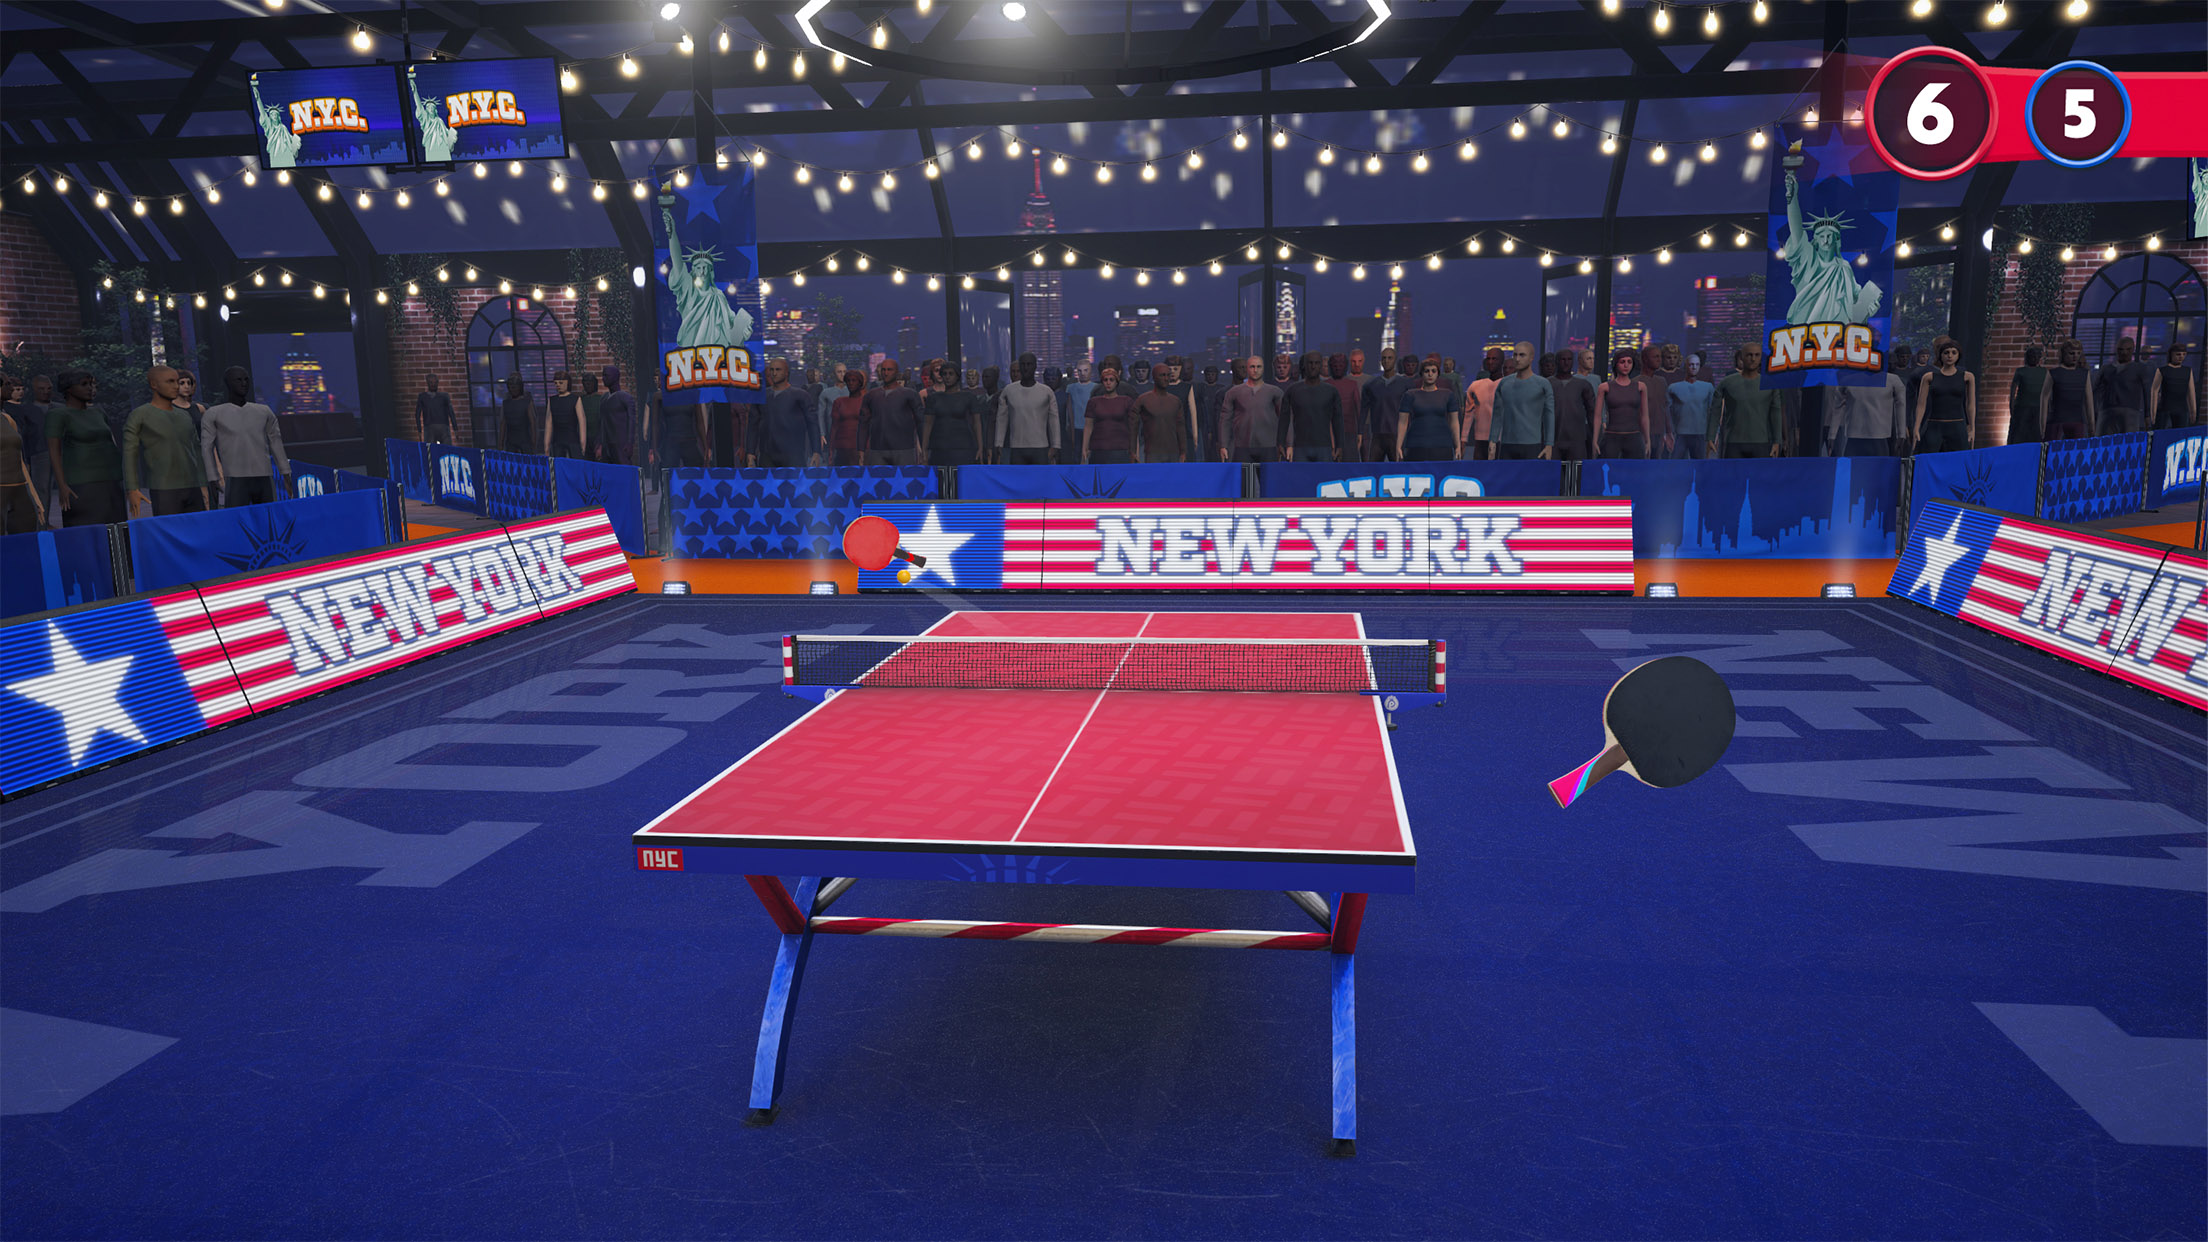 Ping Pong Fury - London Games Festival Official Selection 